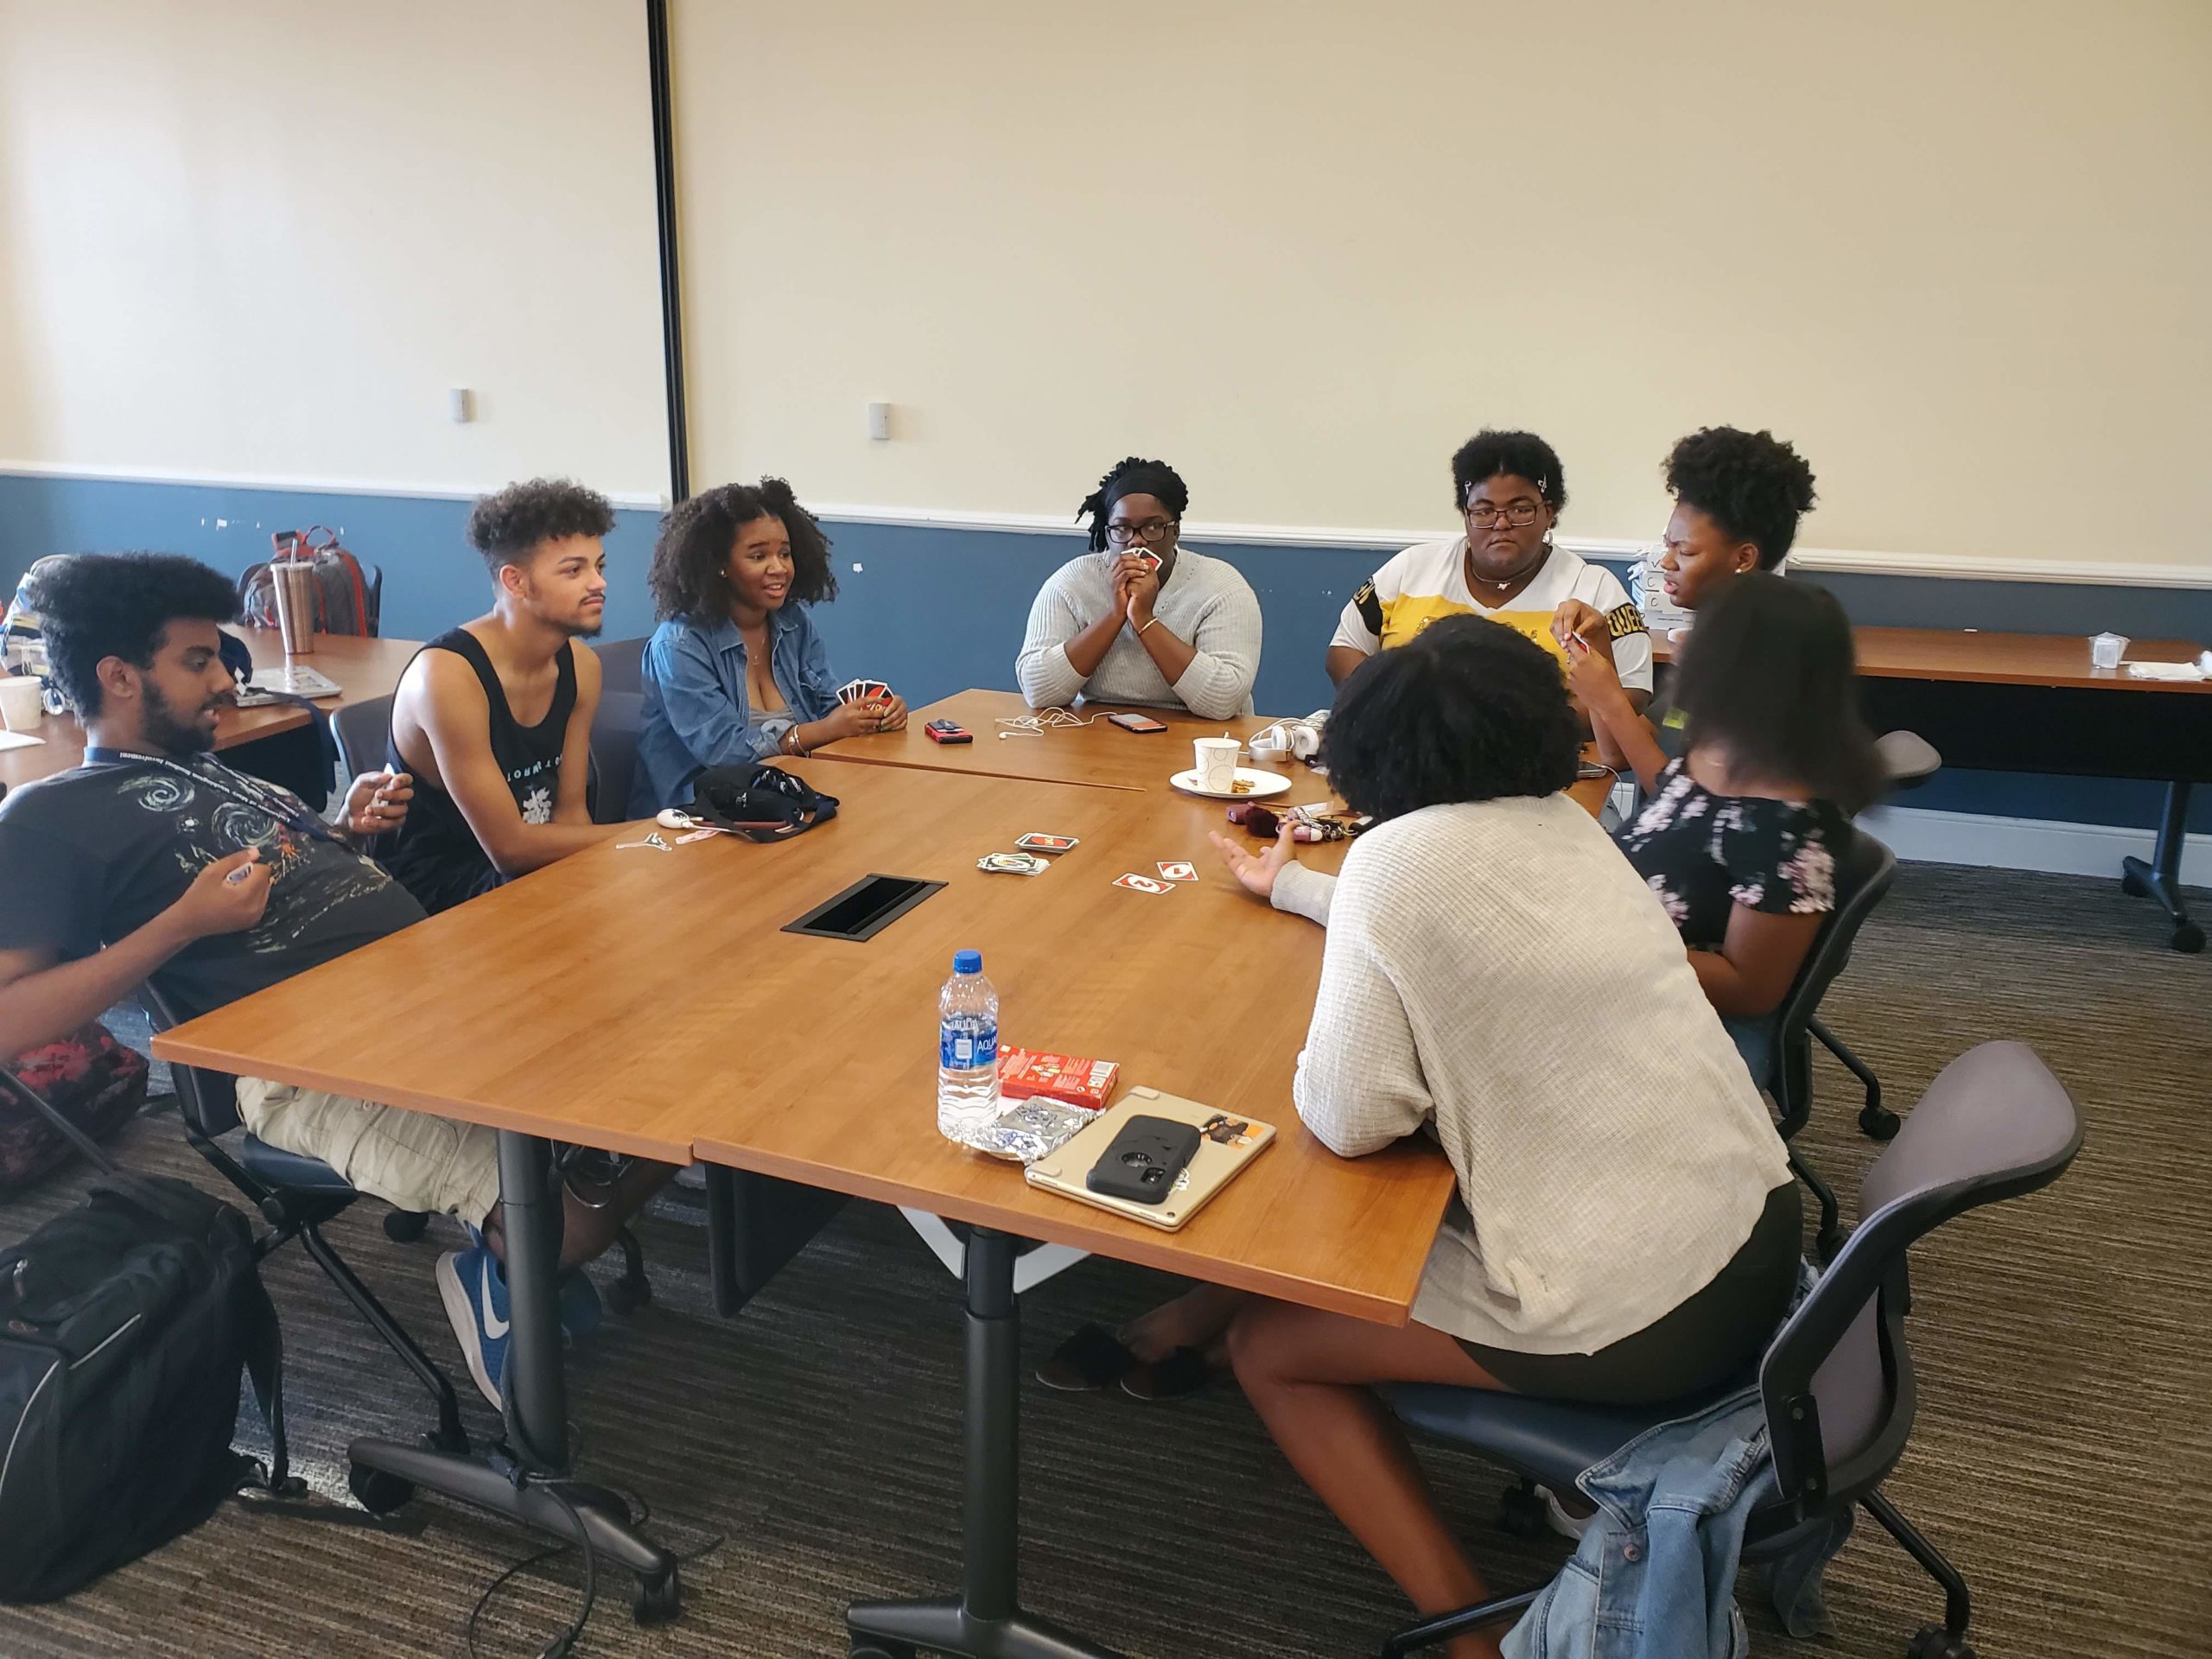 A group of students at a table playing UNO